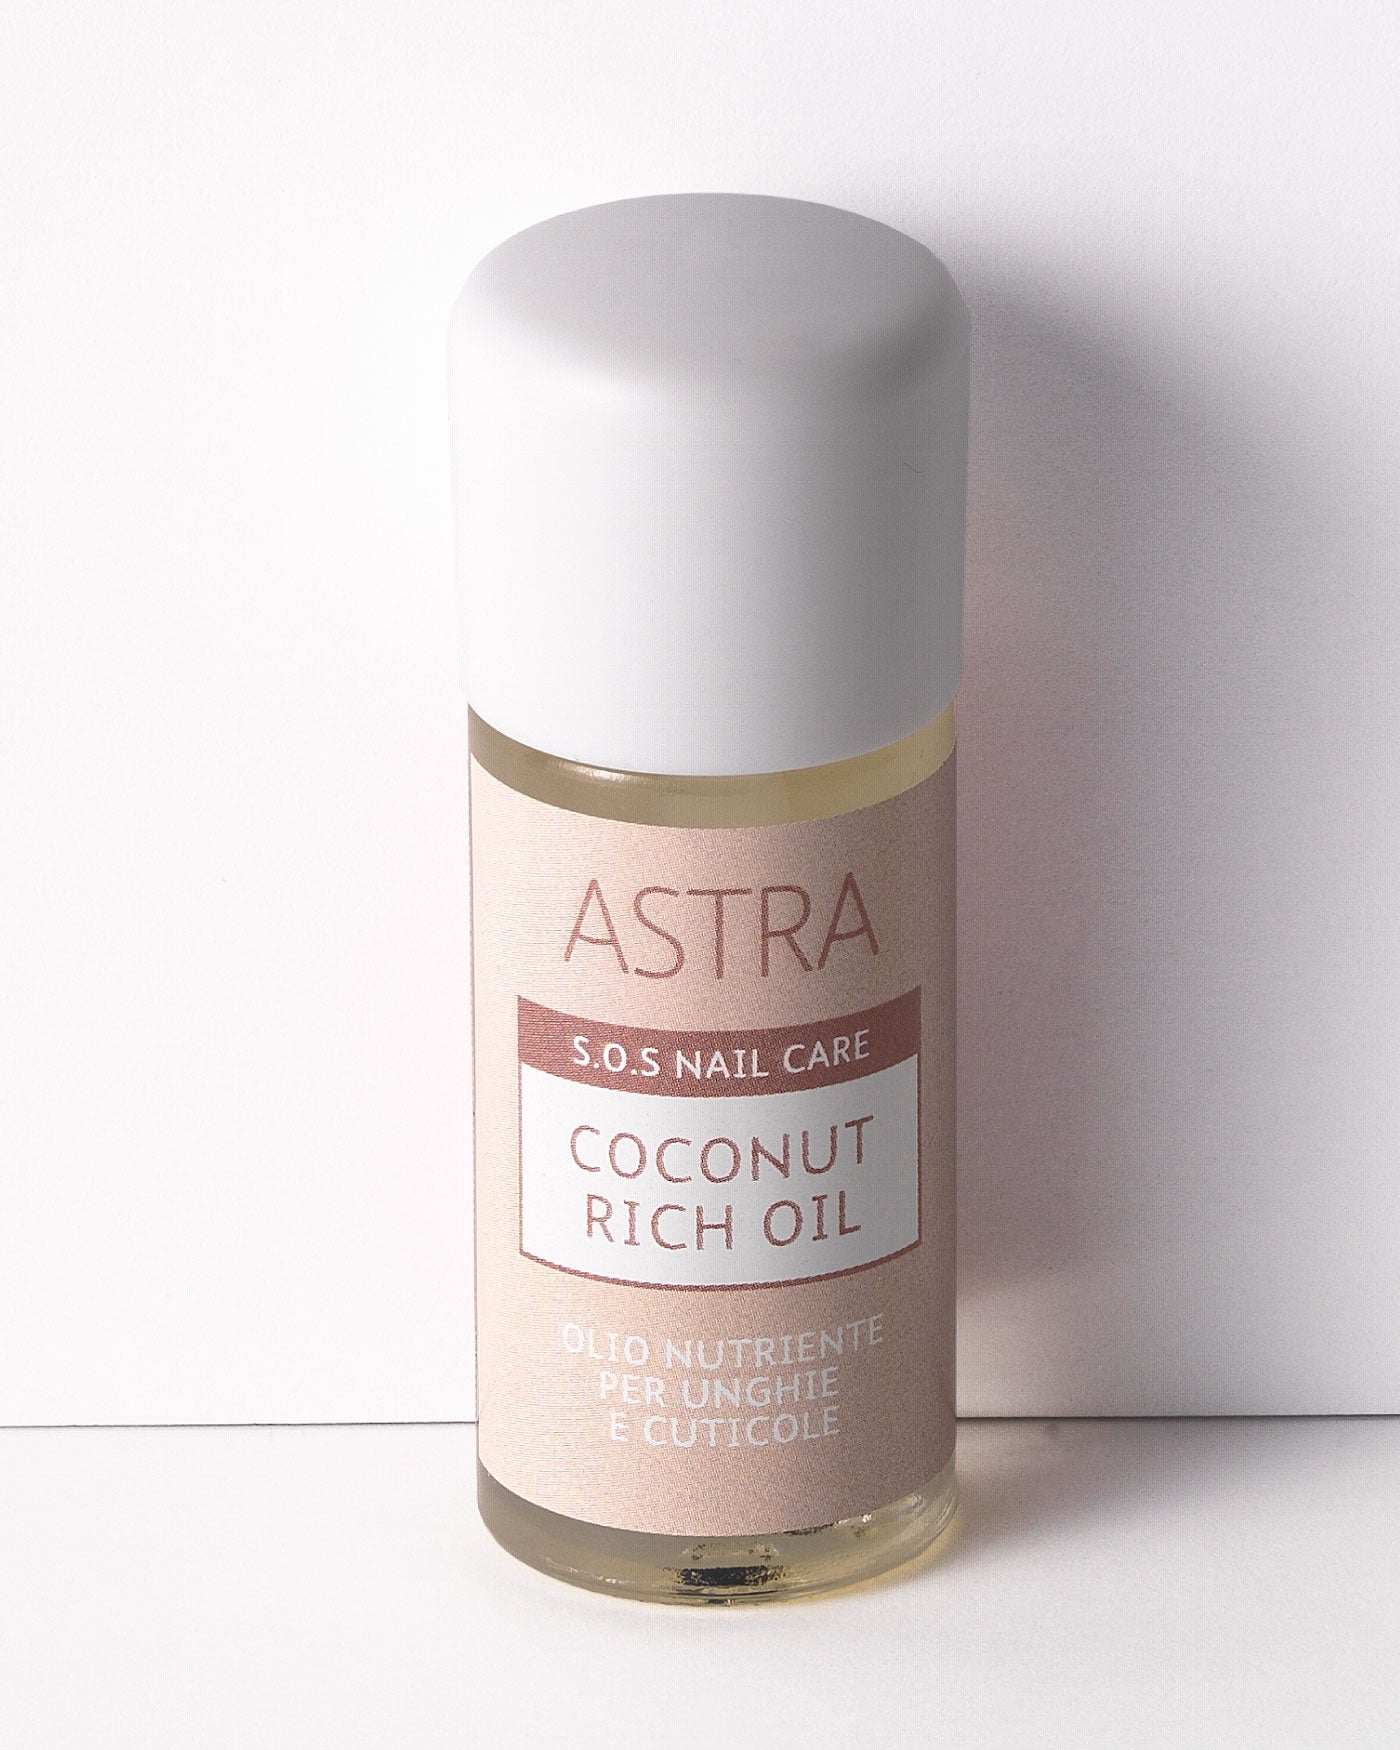 S.O.S NAIL CARE - COCONUT RICH OIL - Default Title - Astra Make-Up